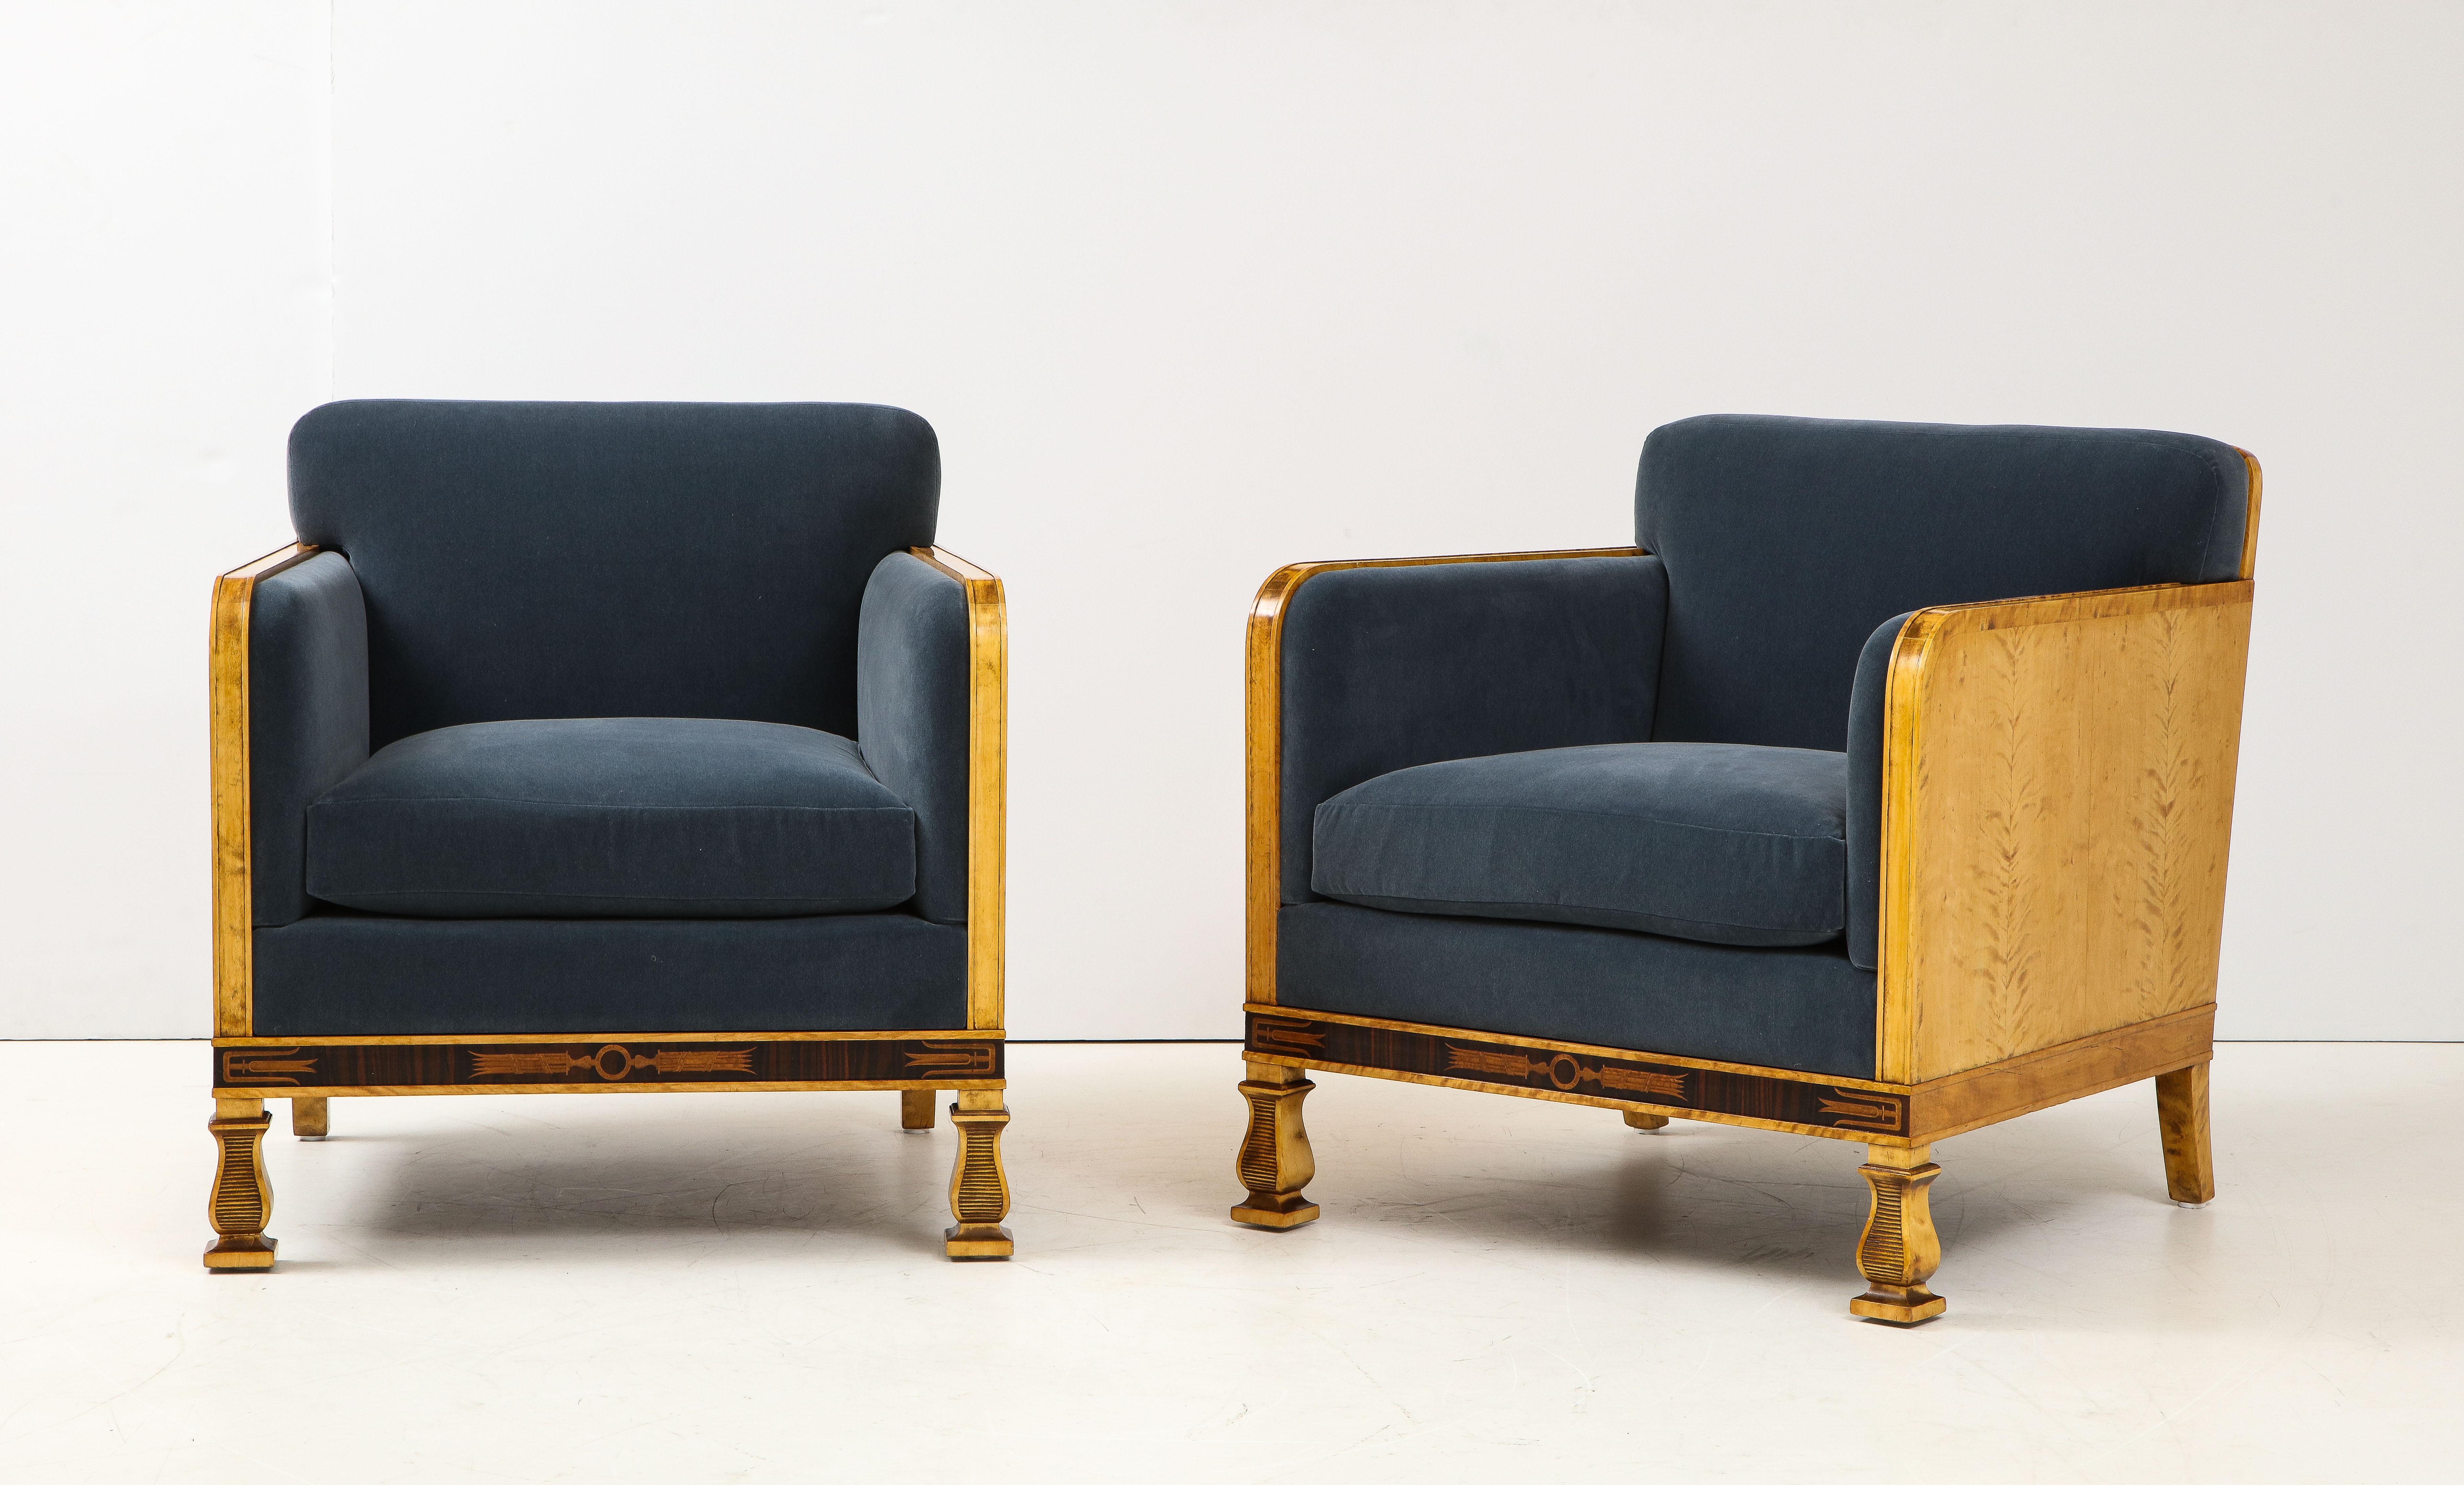 A rare pair of Swedish Grace armchairs, Svenska Möbelfabrikerna Bodafors, 1920s-30s, probably designed by Carl Malmsten, with a rich figured birchwood frame and classical Swedish Grace inlay work. Stamped on the base. New velvet upholstery.